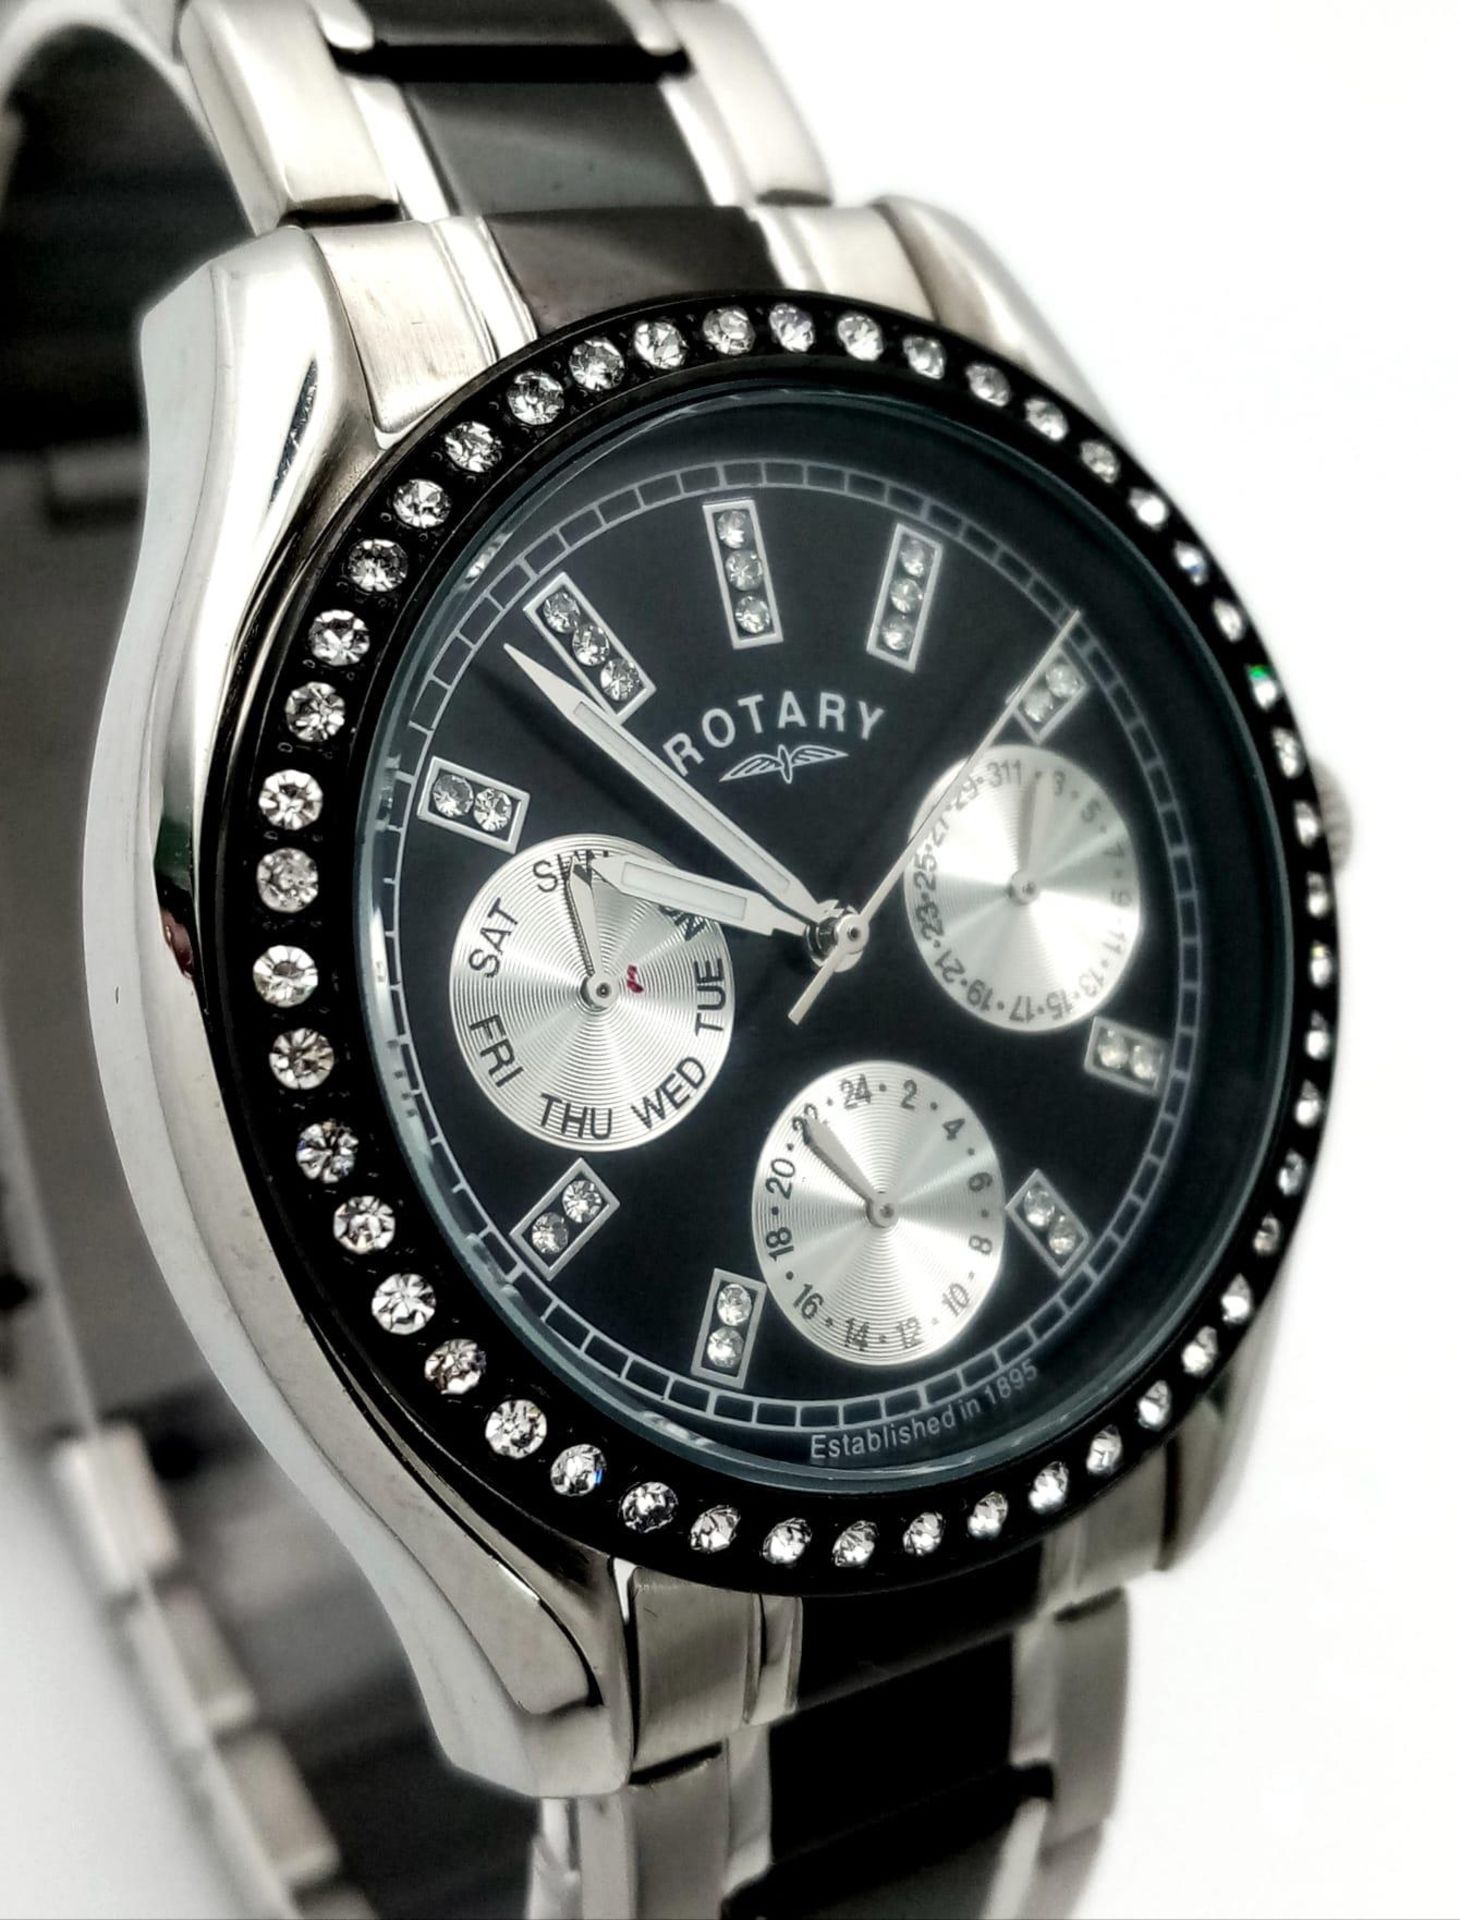 An Excellent Condition Stainless Steel Rotary, Stone Set Bezel, Quartz Watch Model LB04337. 39mm - Image 3 of 7